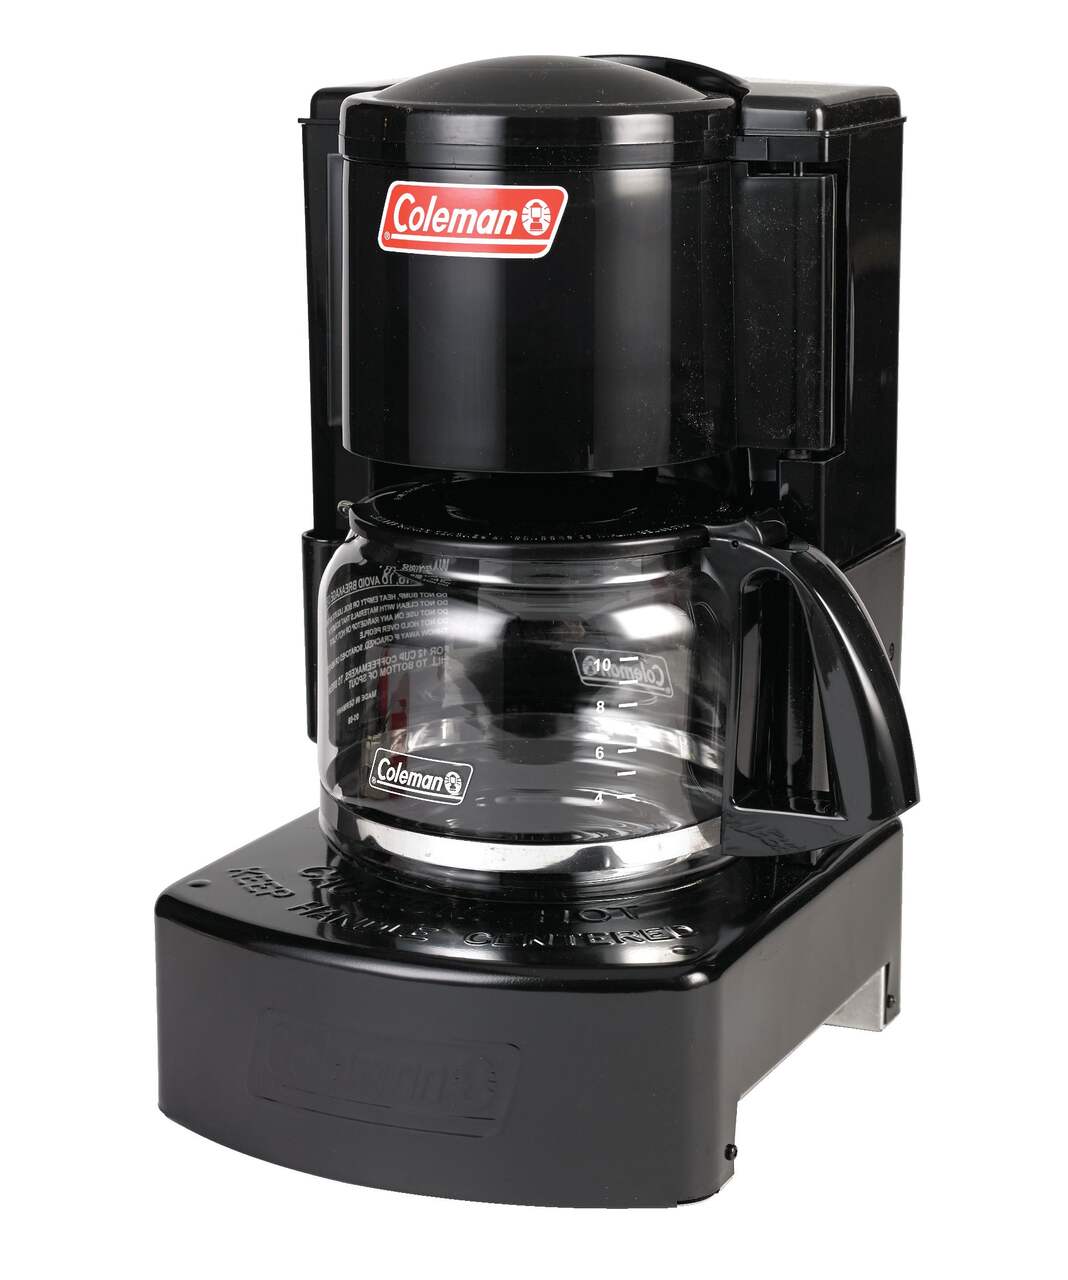 https://media-www.canadiantire.ca/product/playing/camping/camping-living/0762627/coleman-coffee-maker-b457d547-b064-41fe-b089-e77f78d5a949-jpgrendition.jpg?imdensity=1&imwidth=1244&impolicy=mZoom